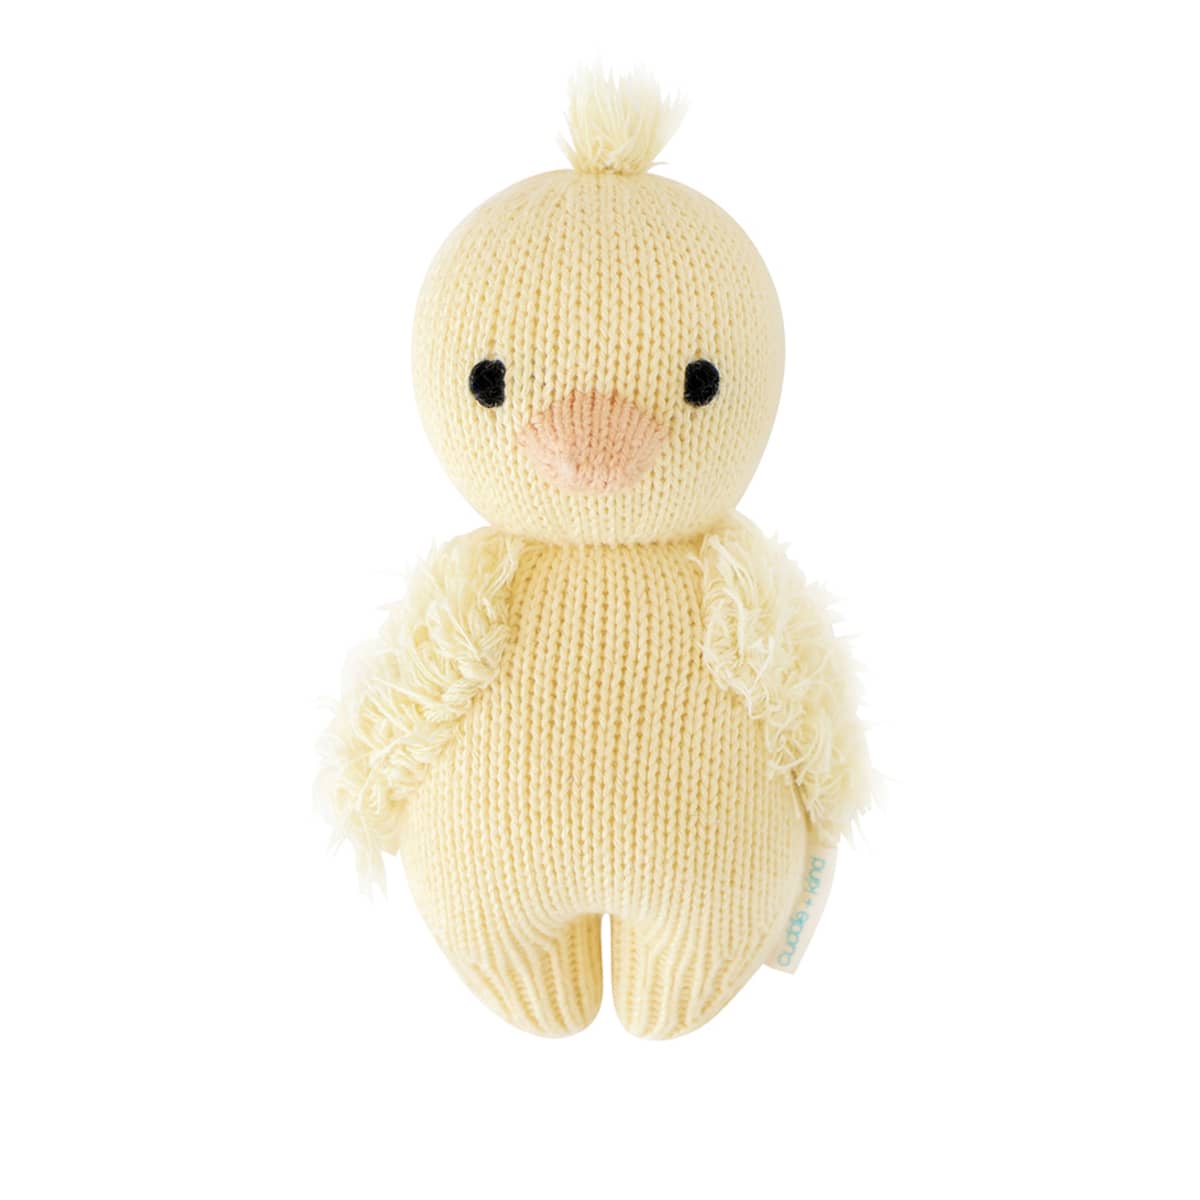 Cuddle + Kind Hand-Knit Doll - Baby Duckling